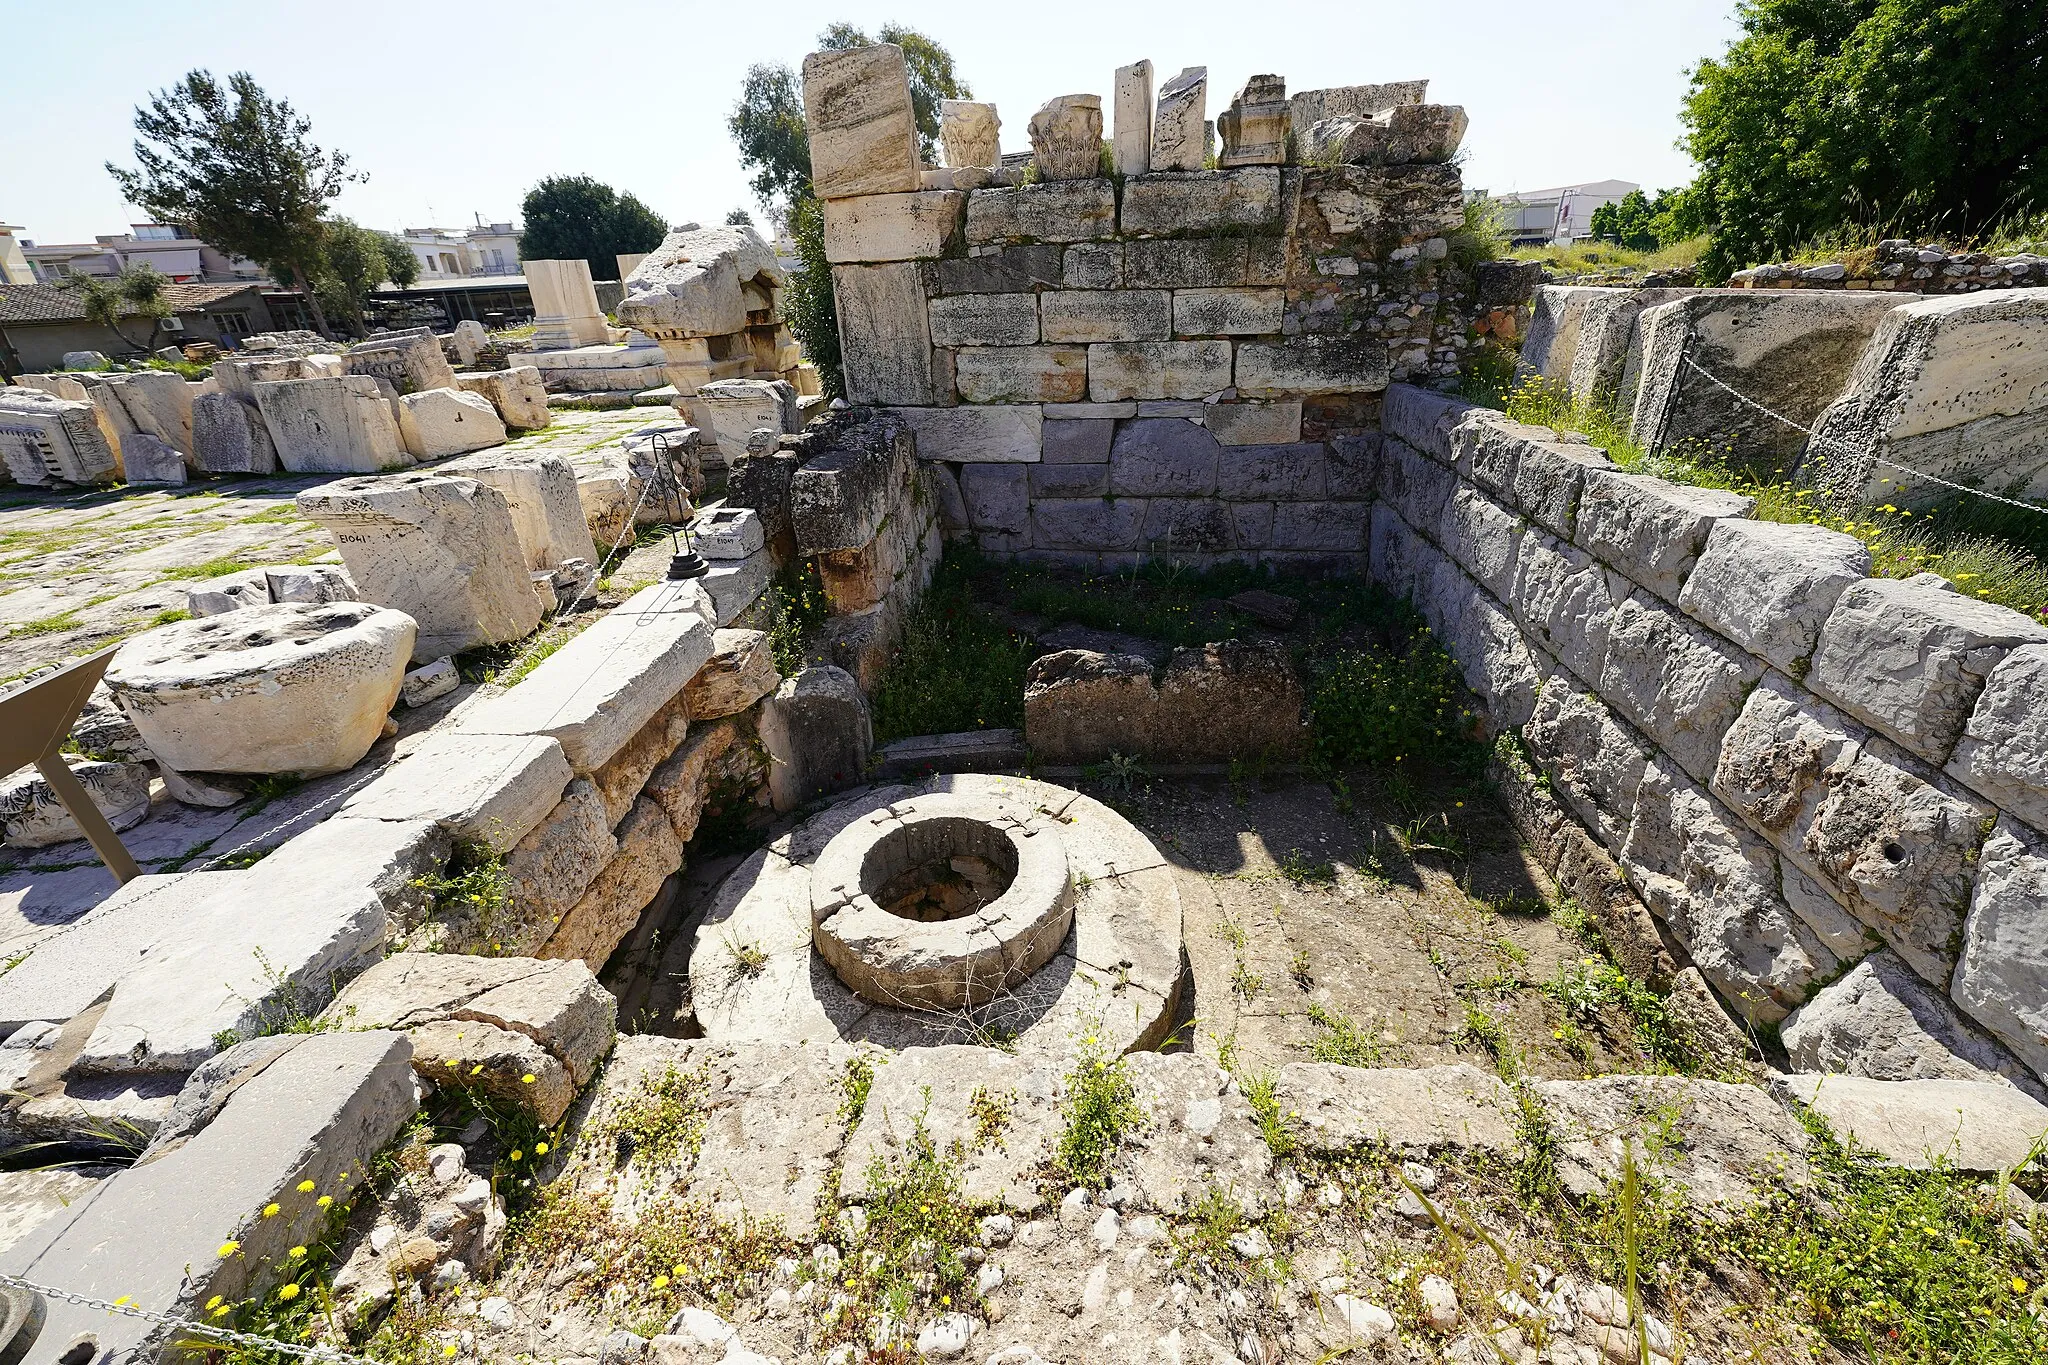 Photo showing: It is the well at which Demeter sat, when she was tired of searching her daughter Persephone.  Pausanias says that maidens of Eleusis performed dances around this well as part of sacred ceremonies. The structure of the well dates to the 6th-beginning of the 5th century BC, but the ancient structures are covered by later constructions dated to Roman times. The depth of the well is 6 meters and it inner side is constructed in the polygonal system of masonry.  The circular stones around the well probably functioned as seats for maidens who sat there chanting their hymns. The space was surrounded by an apsidal wall, destroyed in the 3rd century AD.